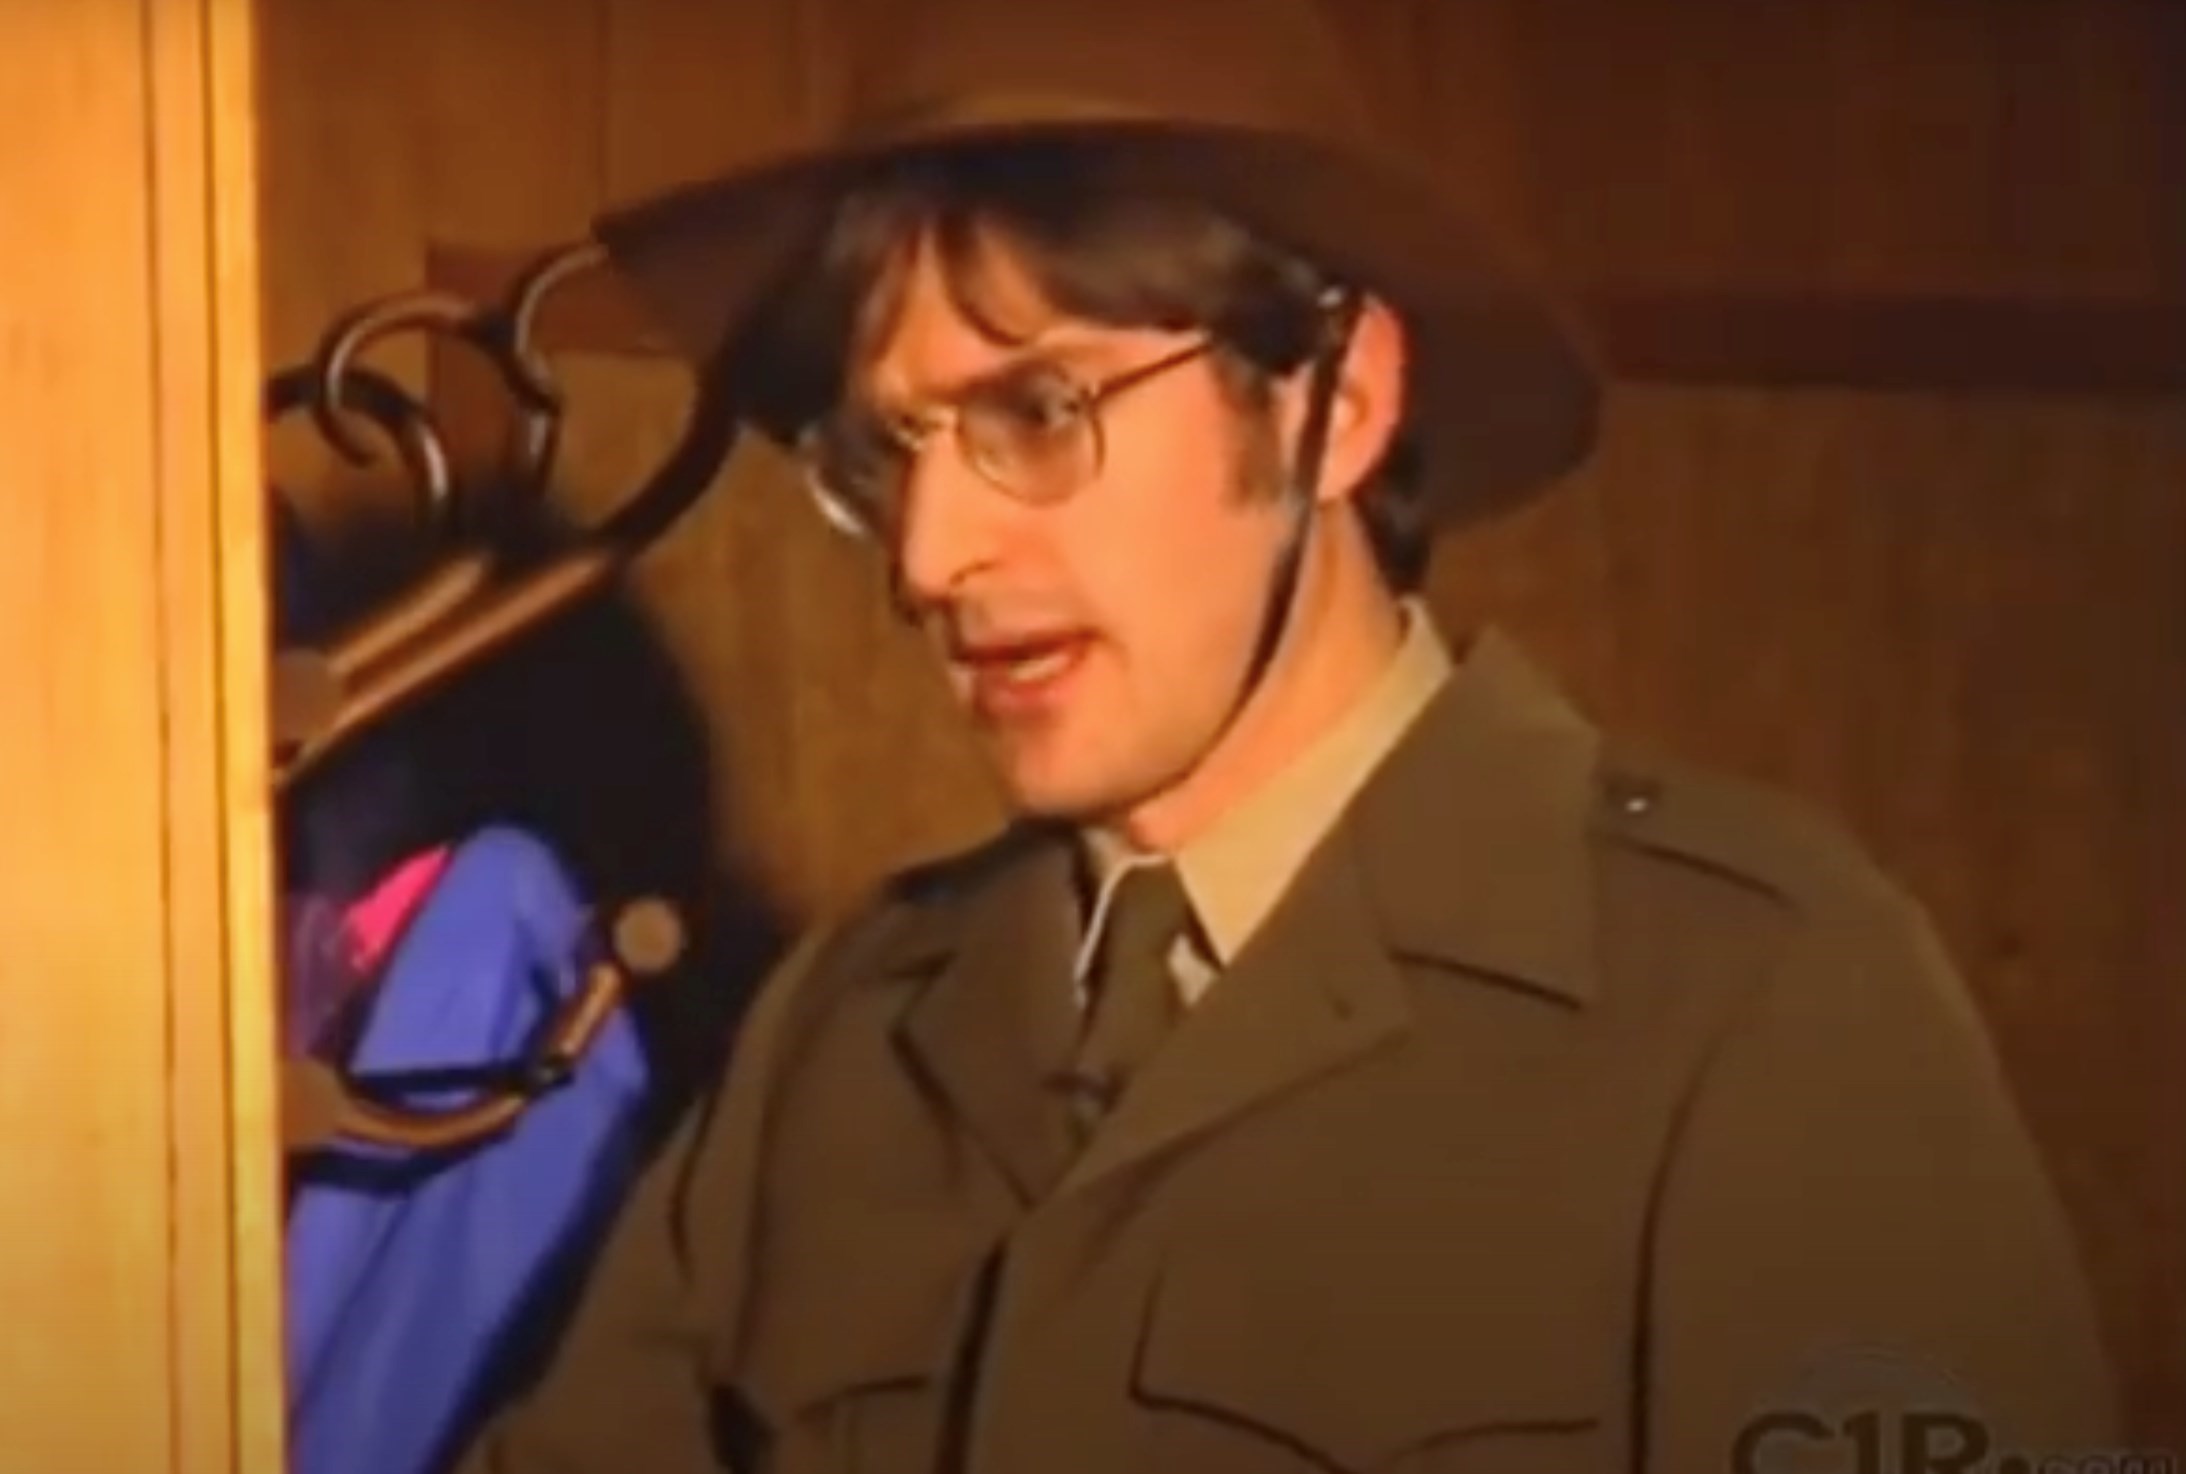 Watch Louis Theroux star in a 90s gay porn film in newly unearthed video |  Dazed